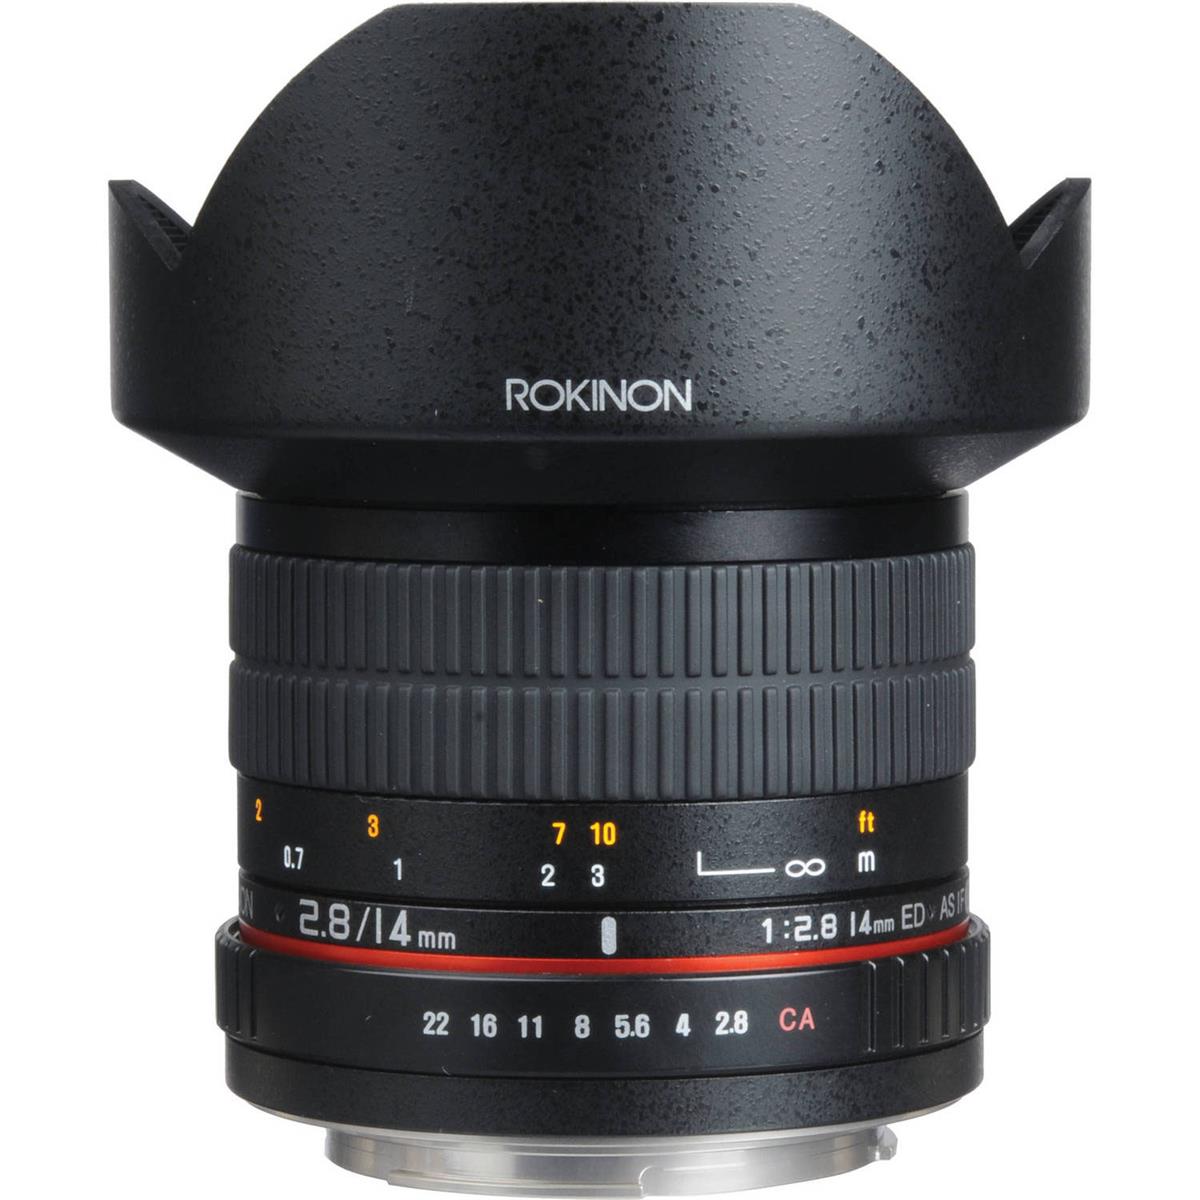 Image of Rokinon 14mm f/2.8 Lens for Micro Four Thirds